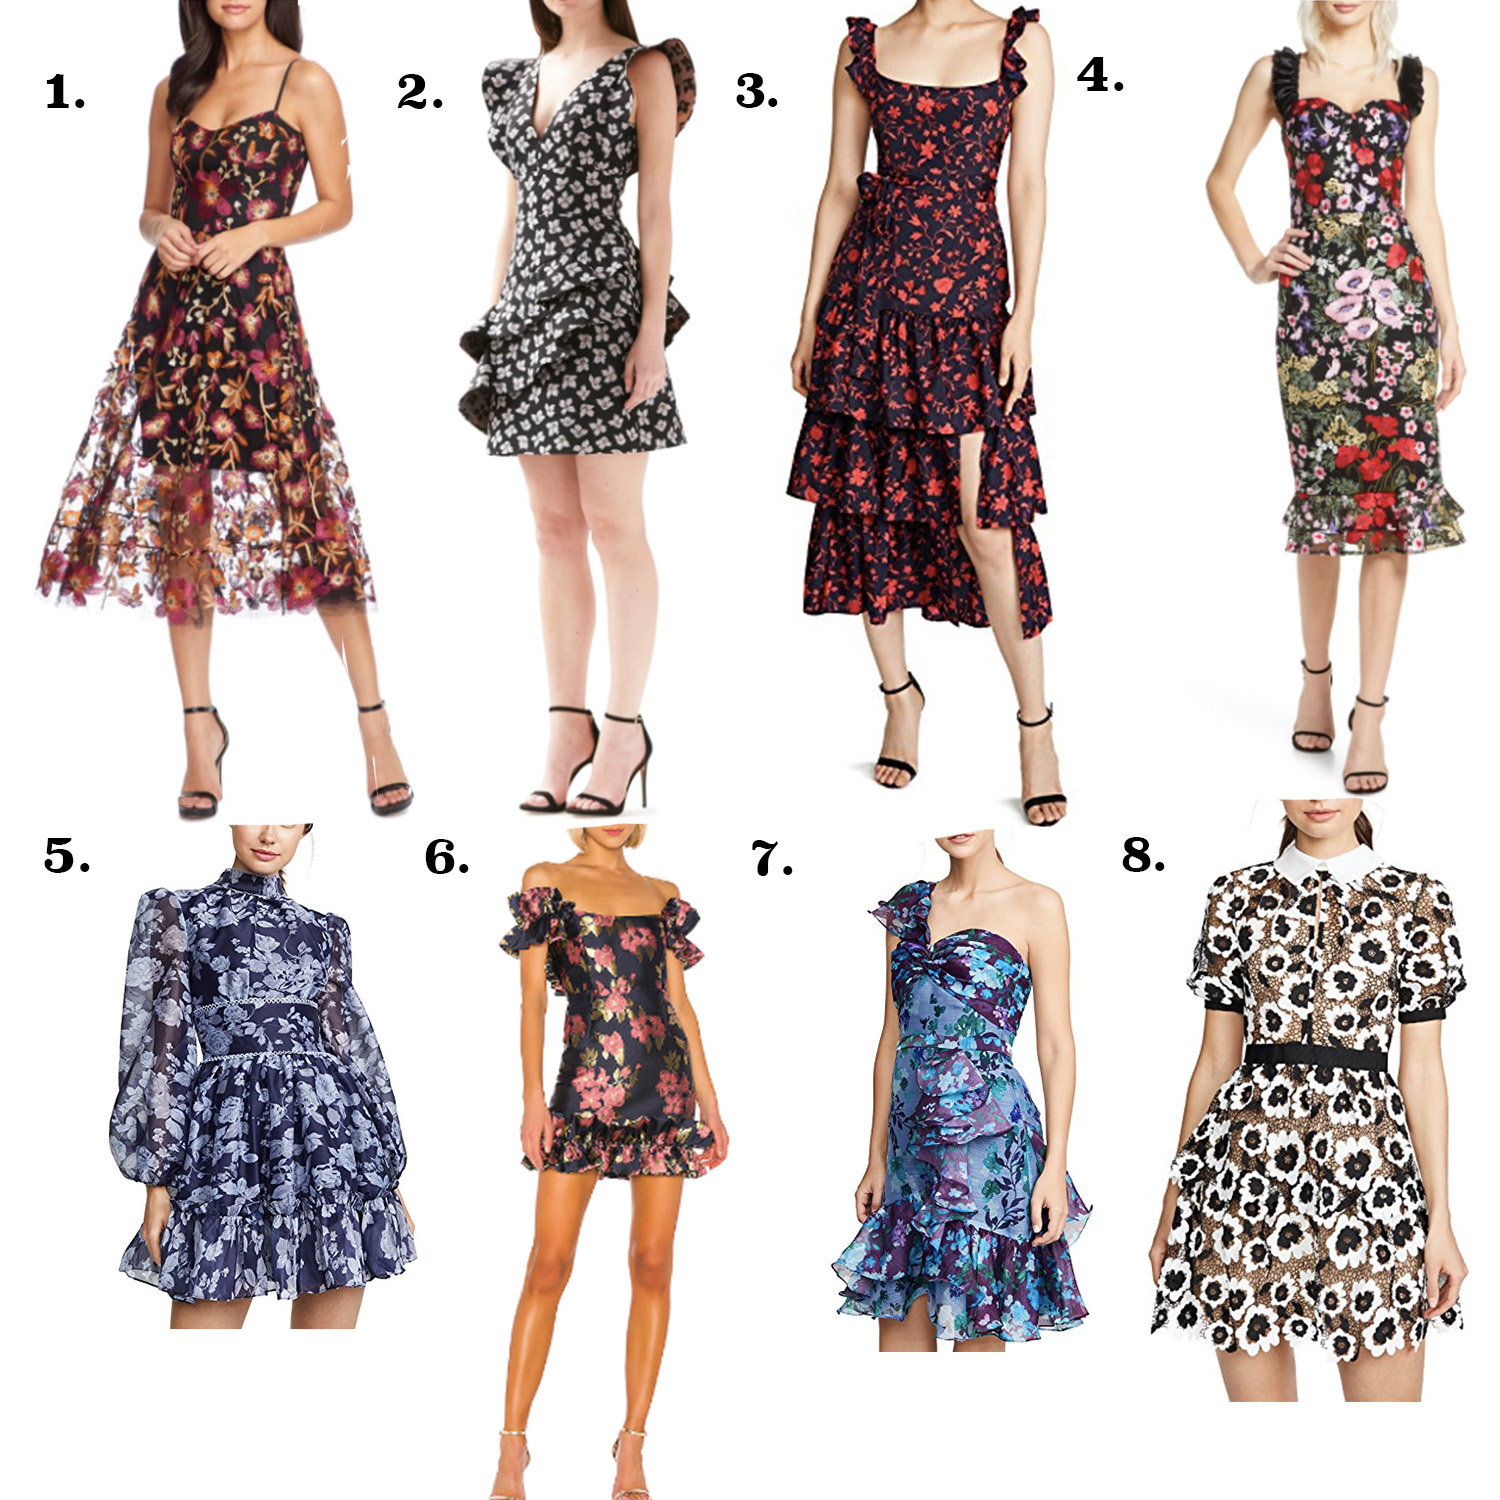 Fall Casual Wedding Guest Dresses Outlet Shop, UP TO 59% OFF |  www.editorialelpirata.com